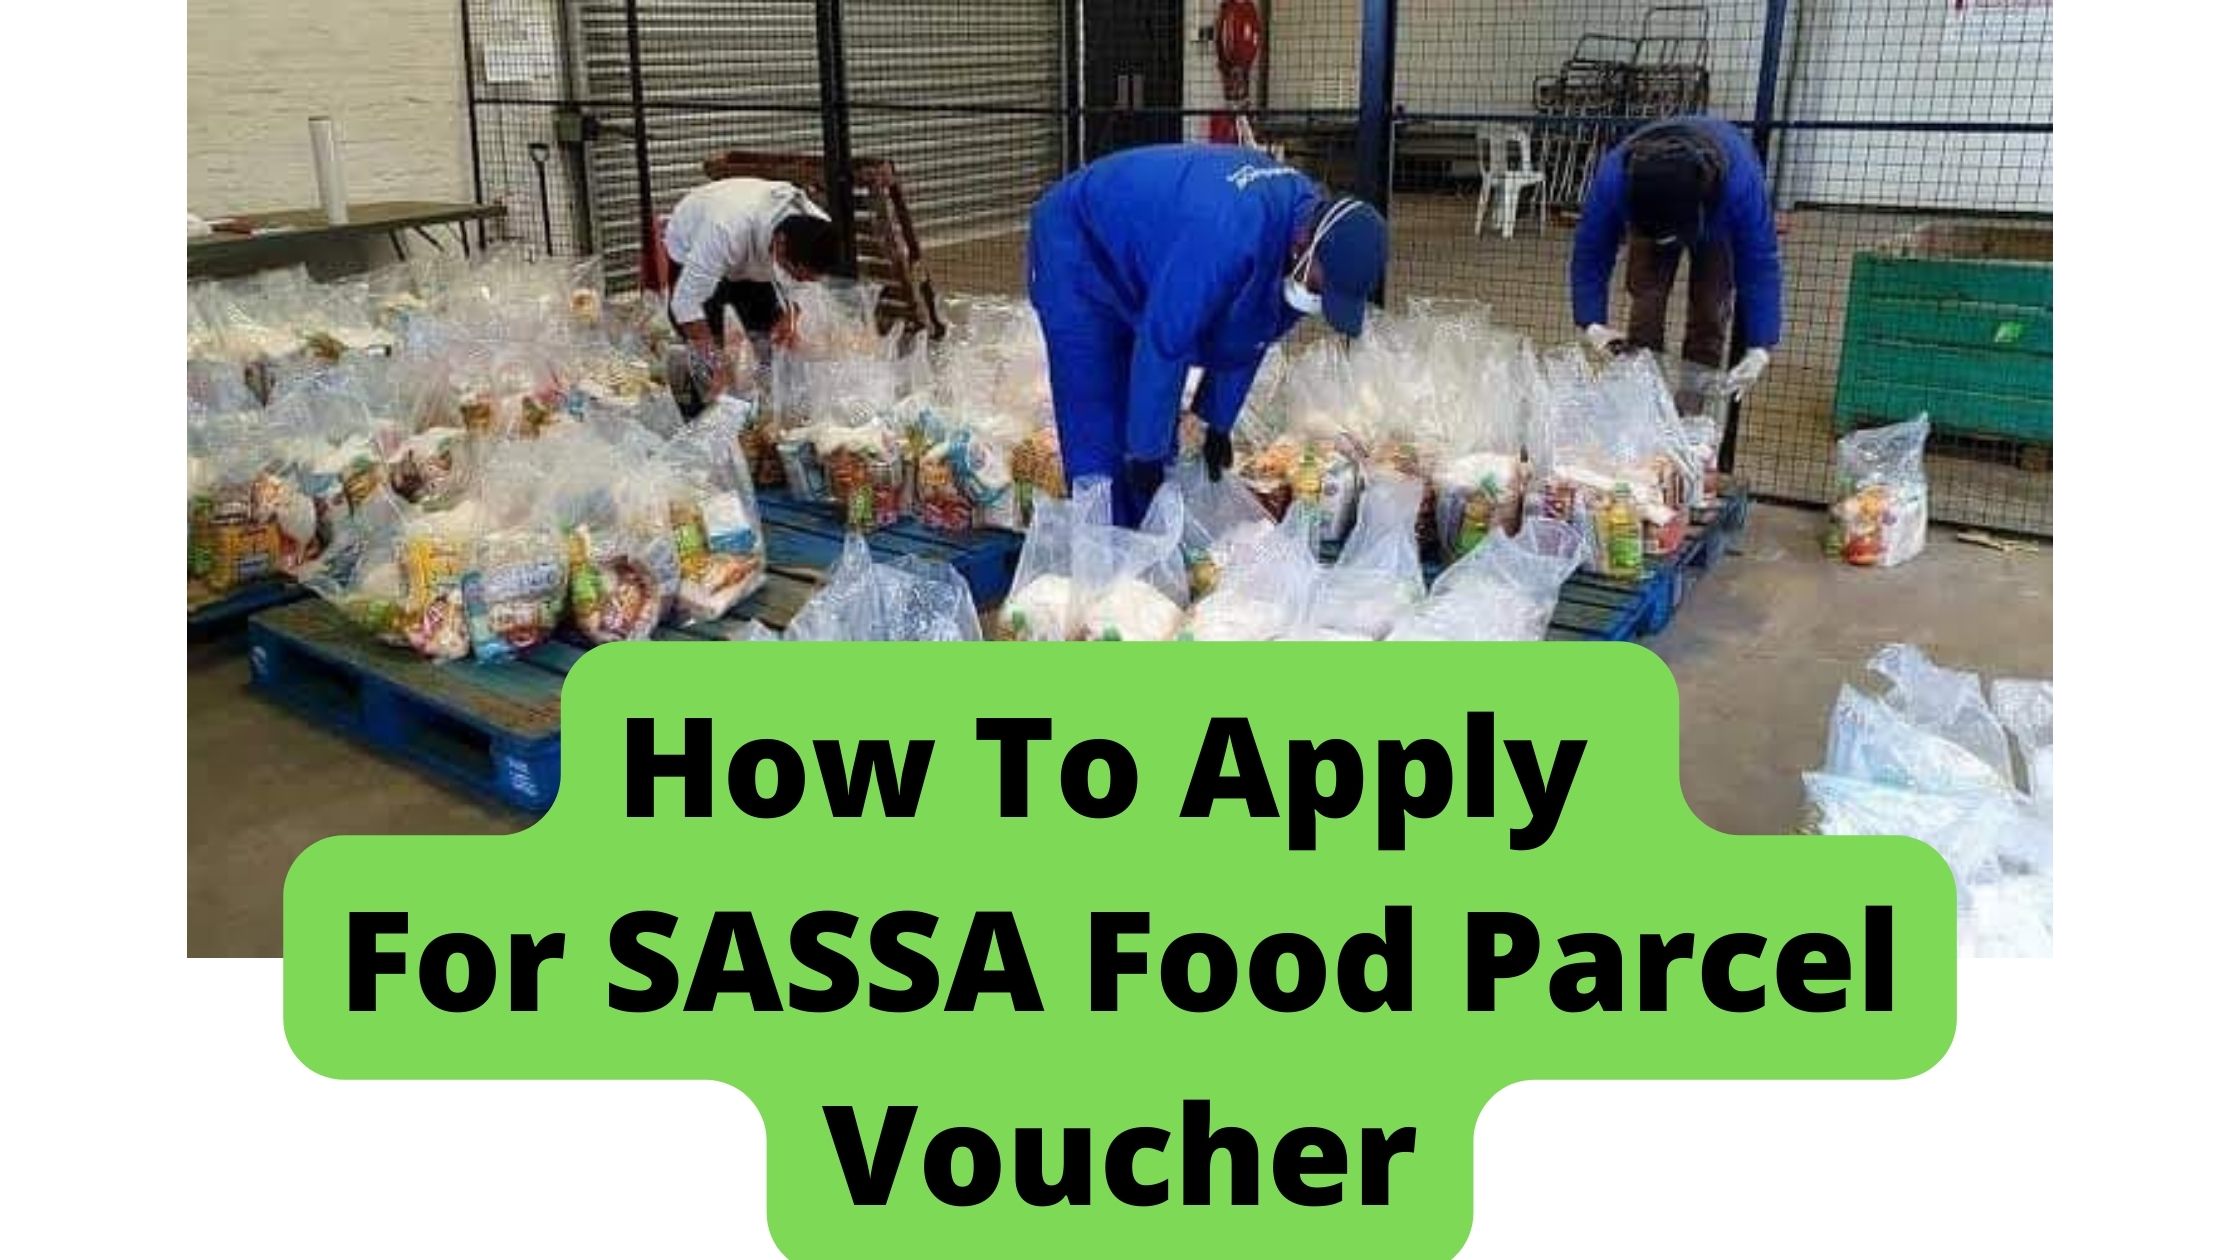 How To Apply For SASSA Food Parcel Voucher